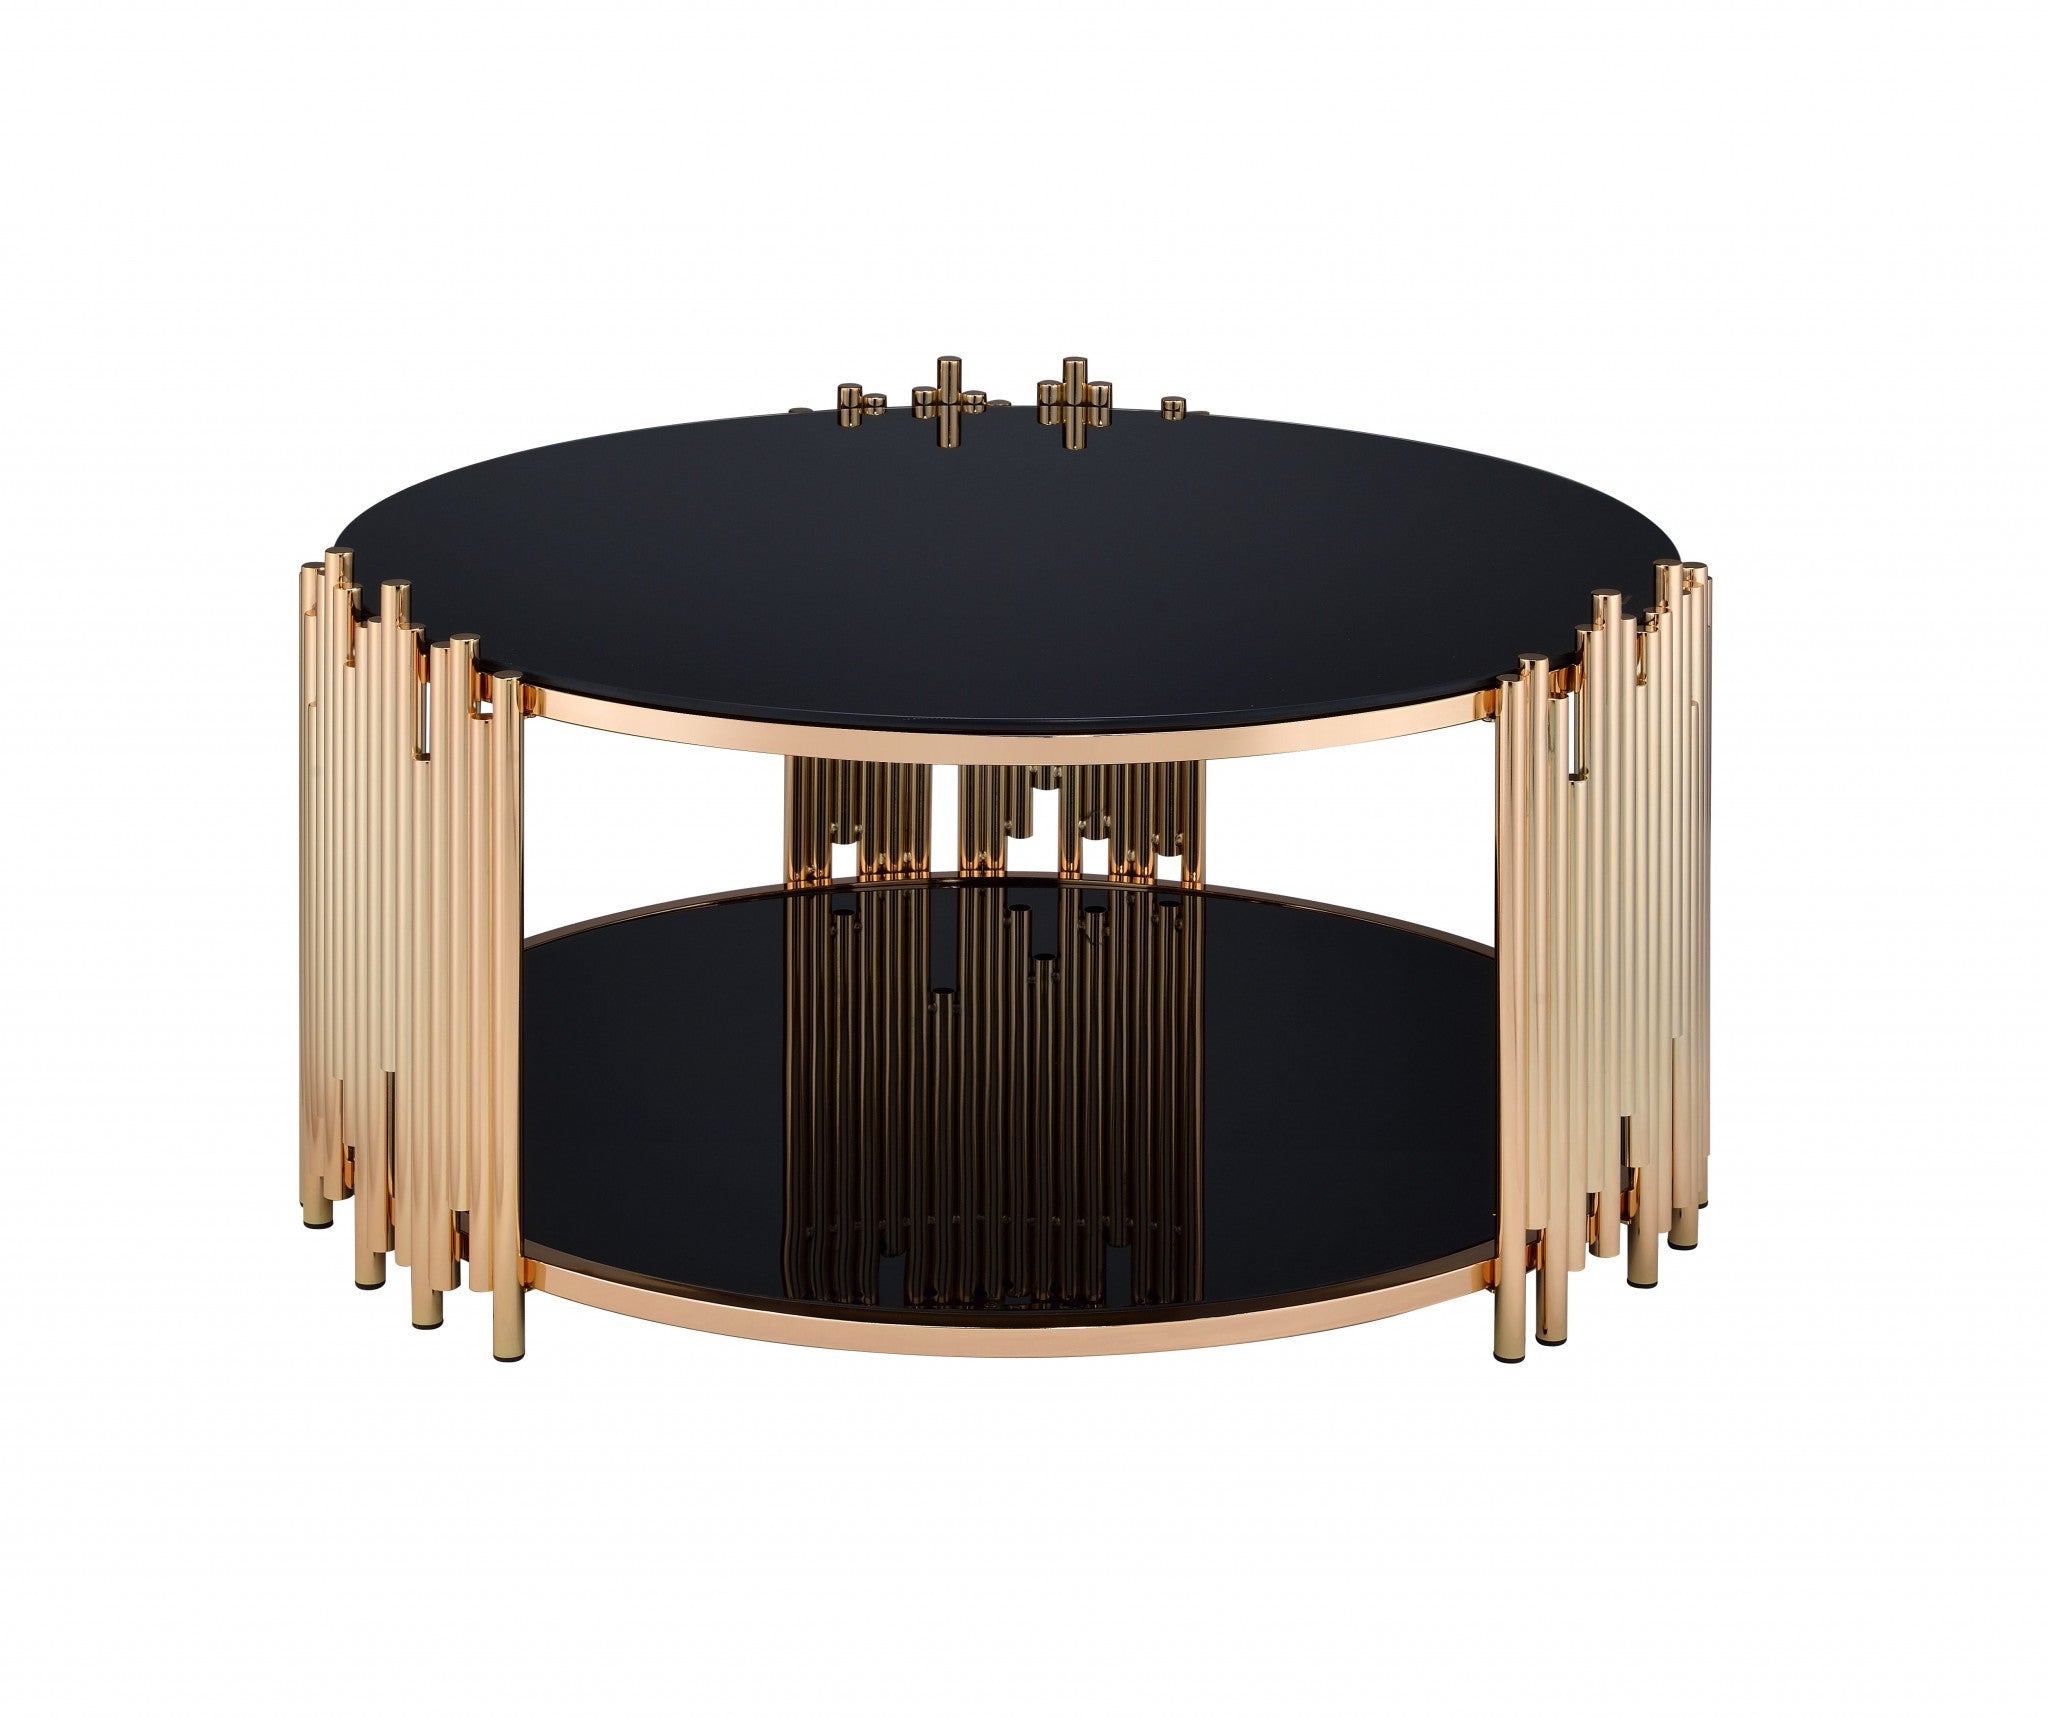 37" X 37" X 18" Black Glass And Gold Coffee Table